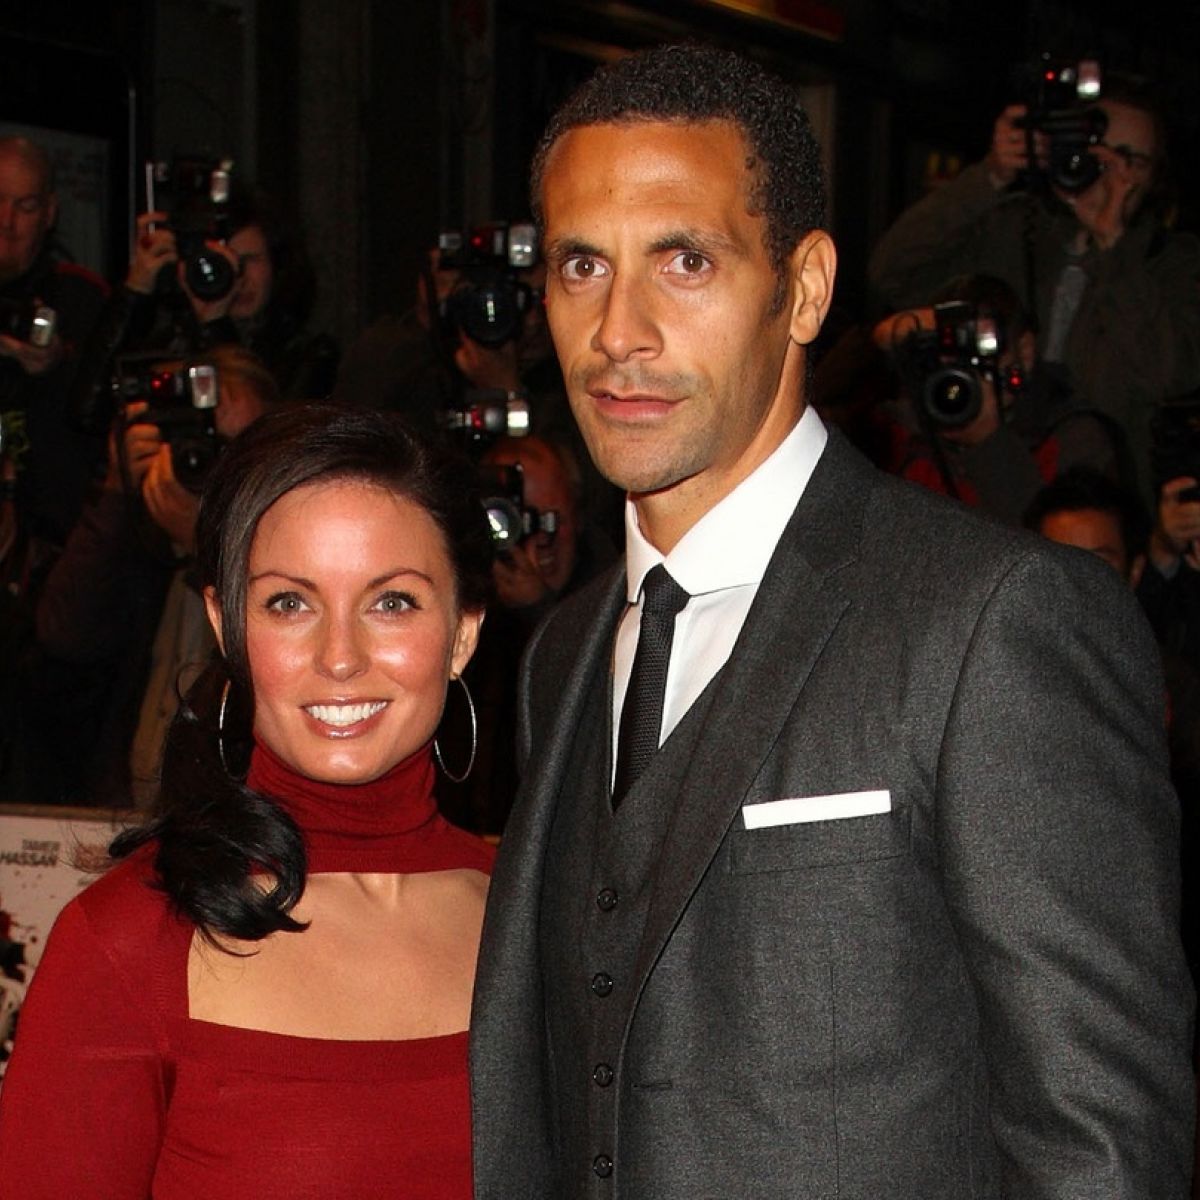 Rio Ferdinand Says He Turned To Alcohol After Death Of Wife